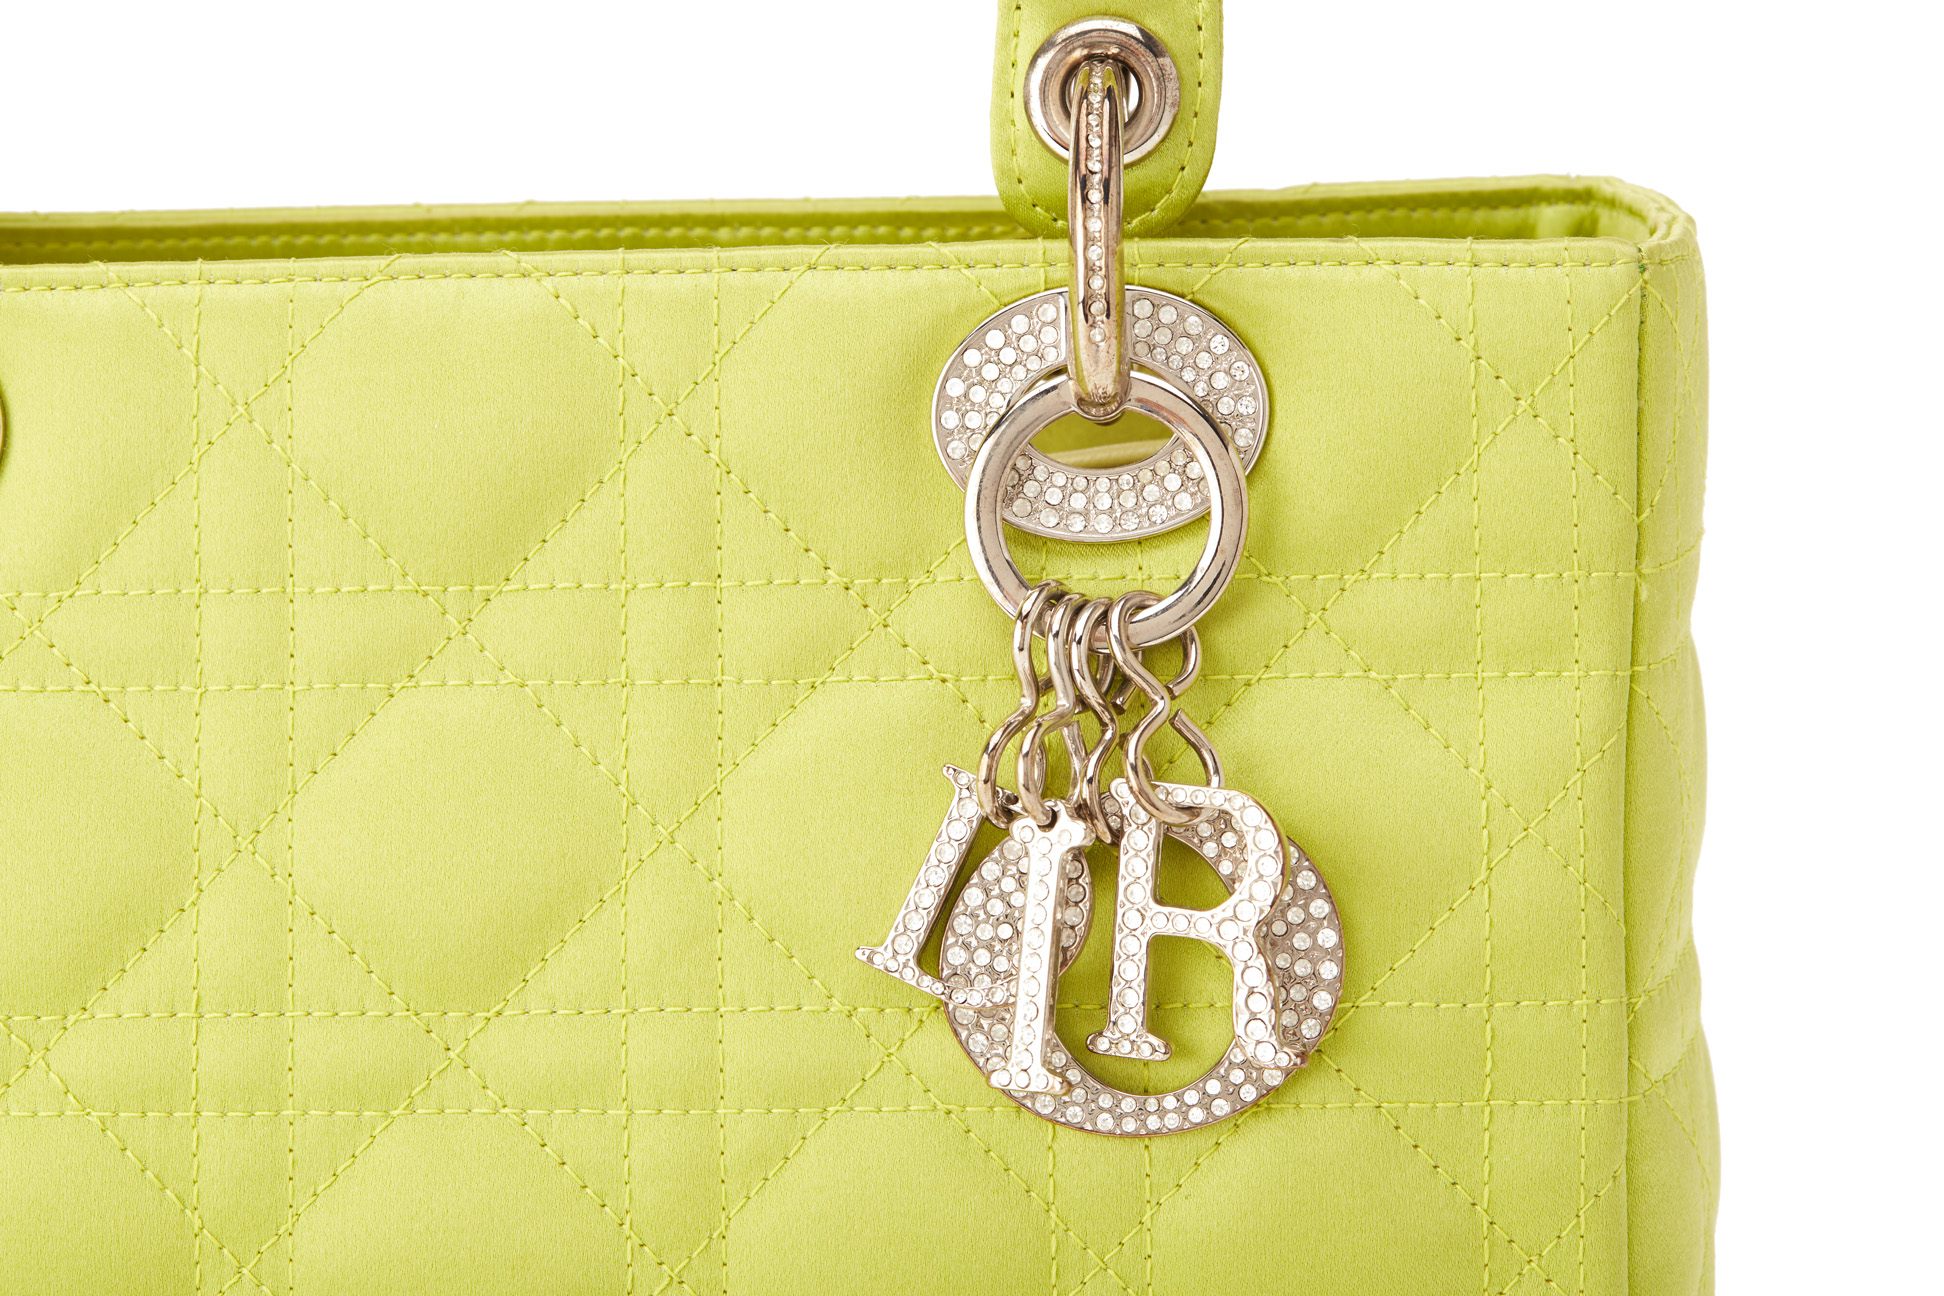 A CHRISTIAN DIOR QUILTED GREEN SATIN MEDIUM LADY DIOR - Image 2 of 6